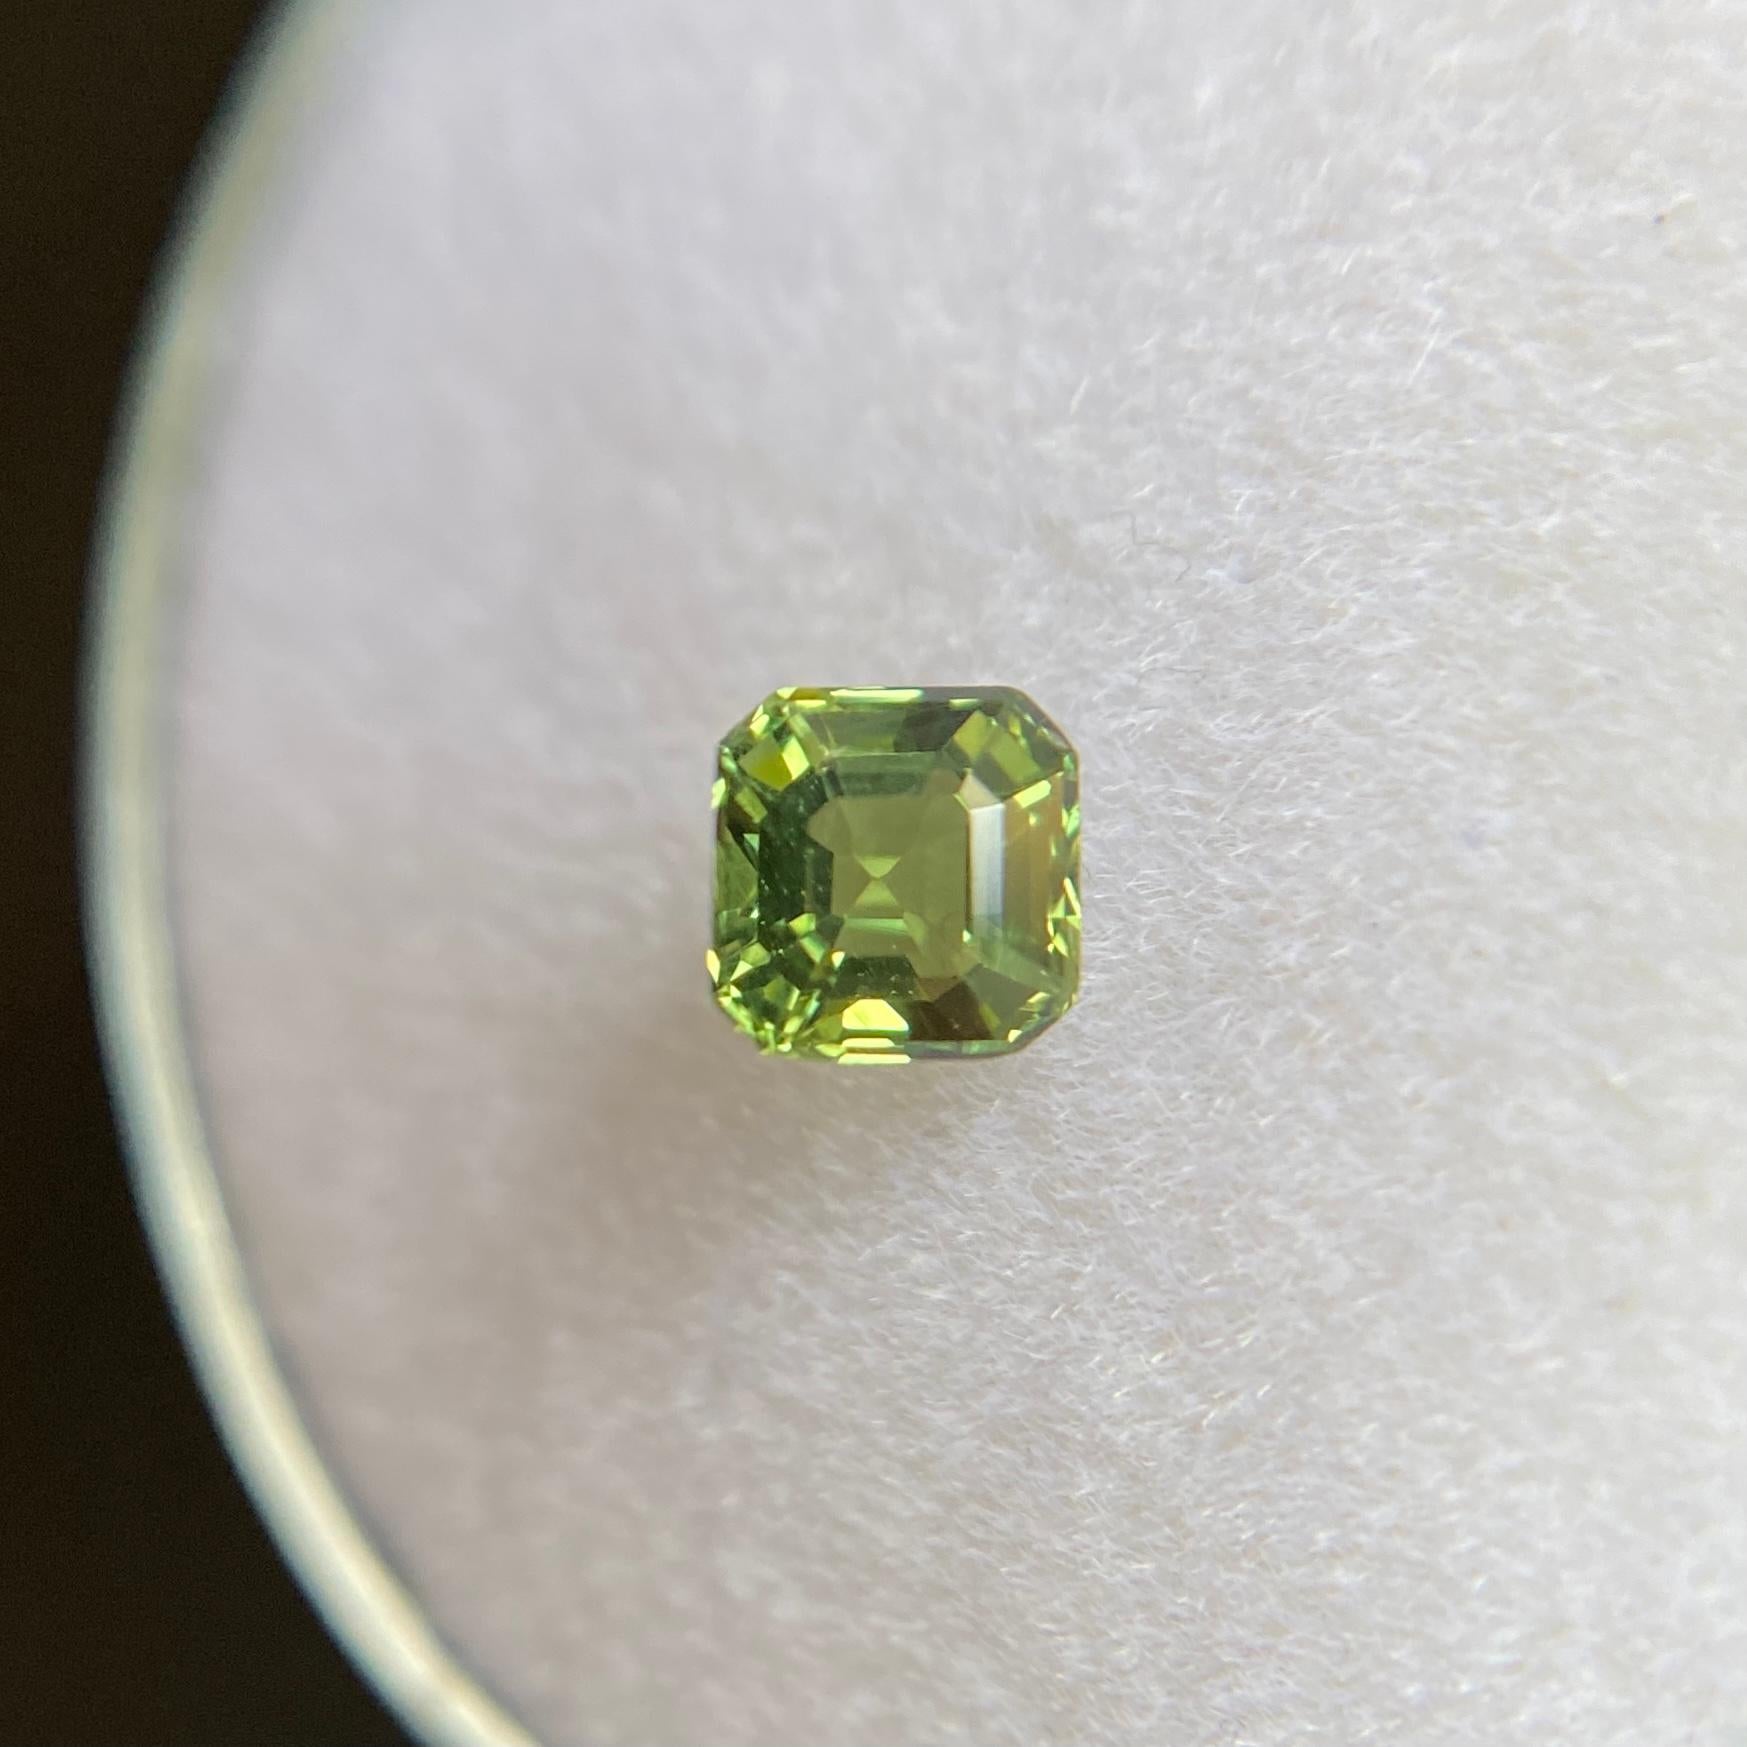 Natural Australian Bluish Green Sapphire Gemstone.

0.53 Carat with a beautiful blue green colour and an excellent emerald octagon cut. Also has excellent clarity, very clean stone. Practically flawless.

Totally untreated and unheated, very rare